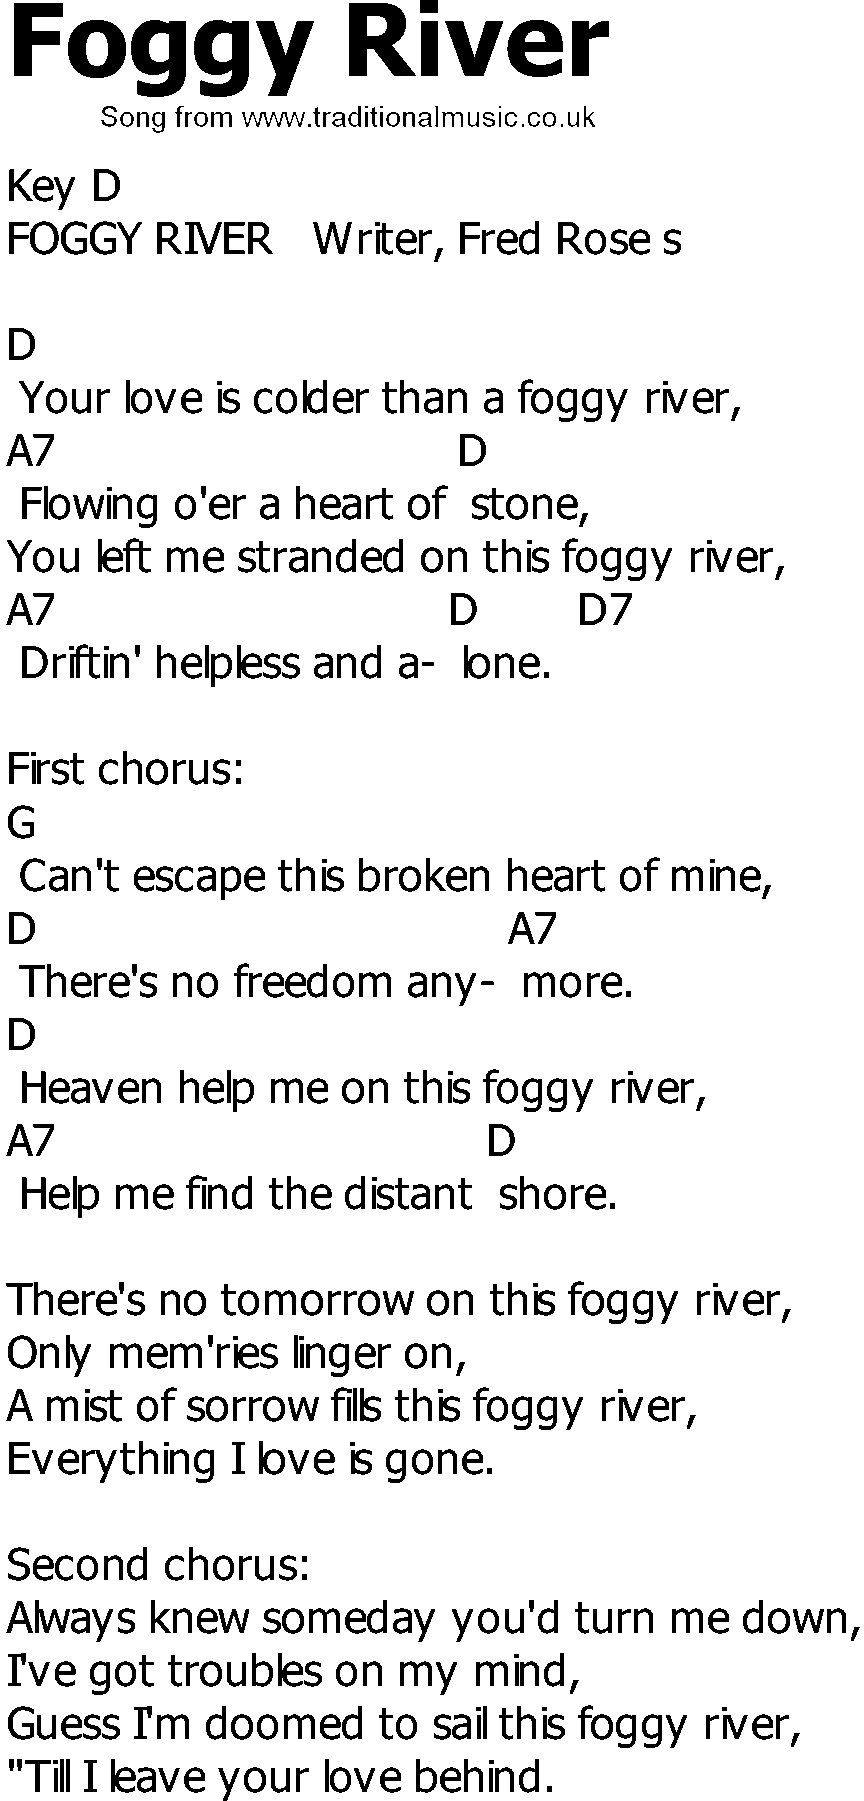 Old Country song lyrics with chords - Foggy River